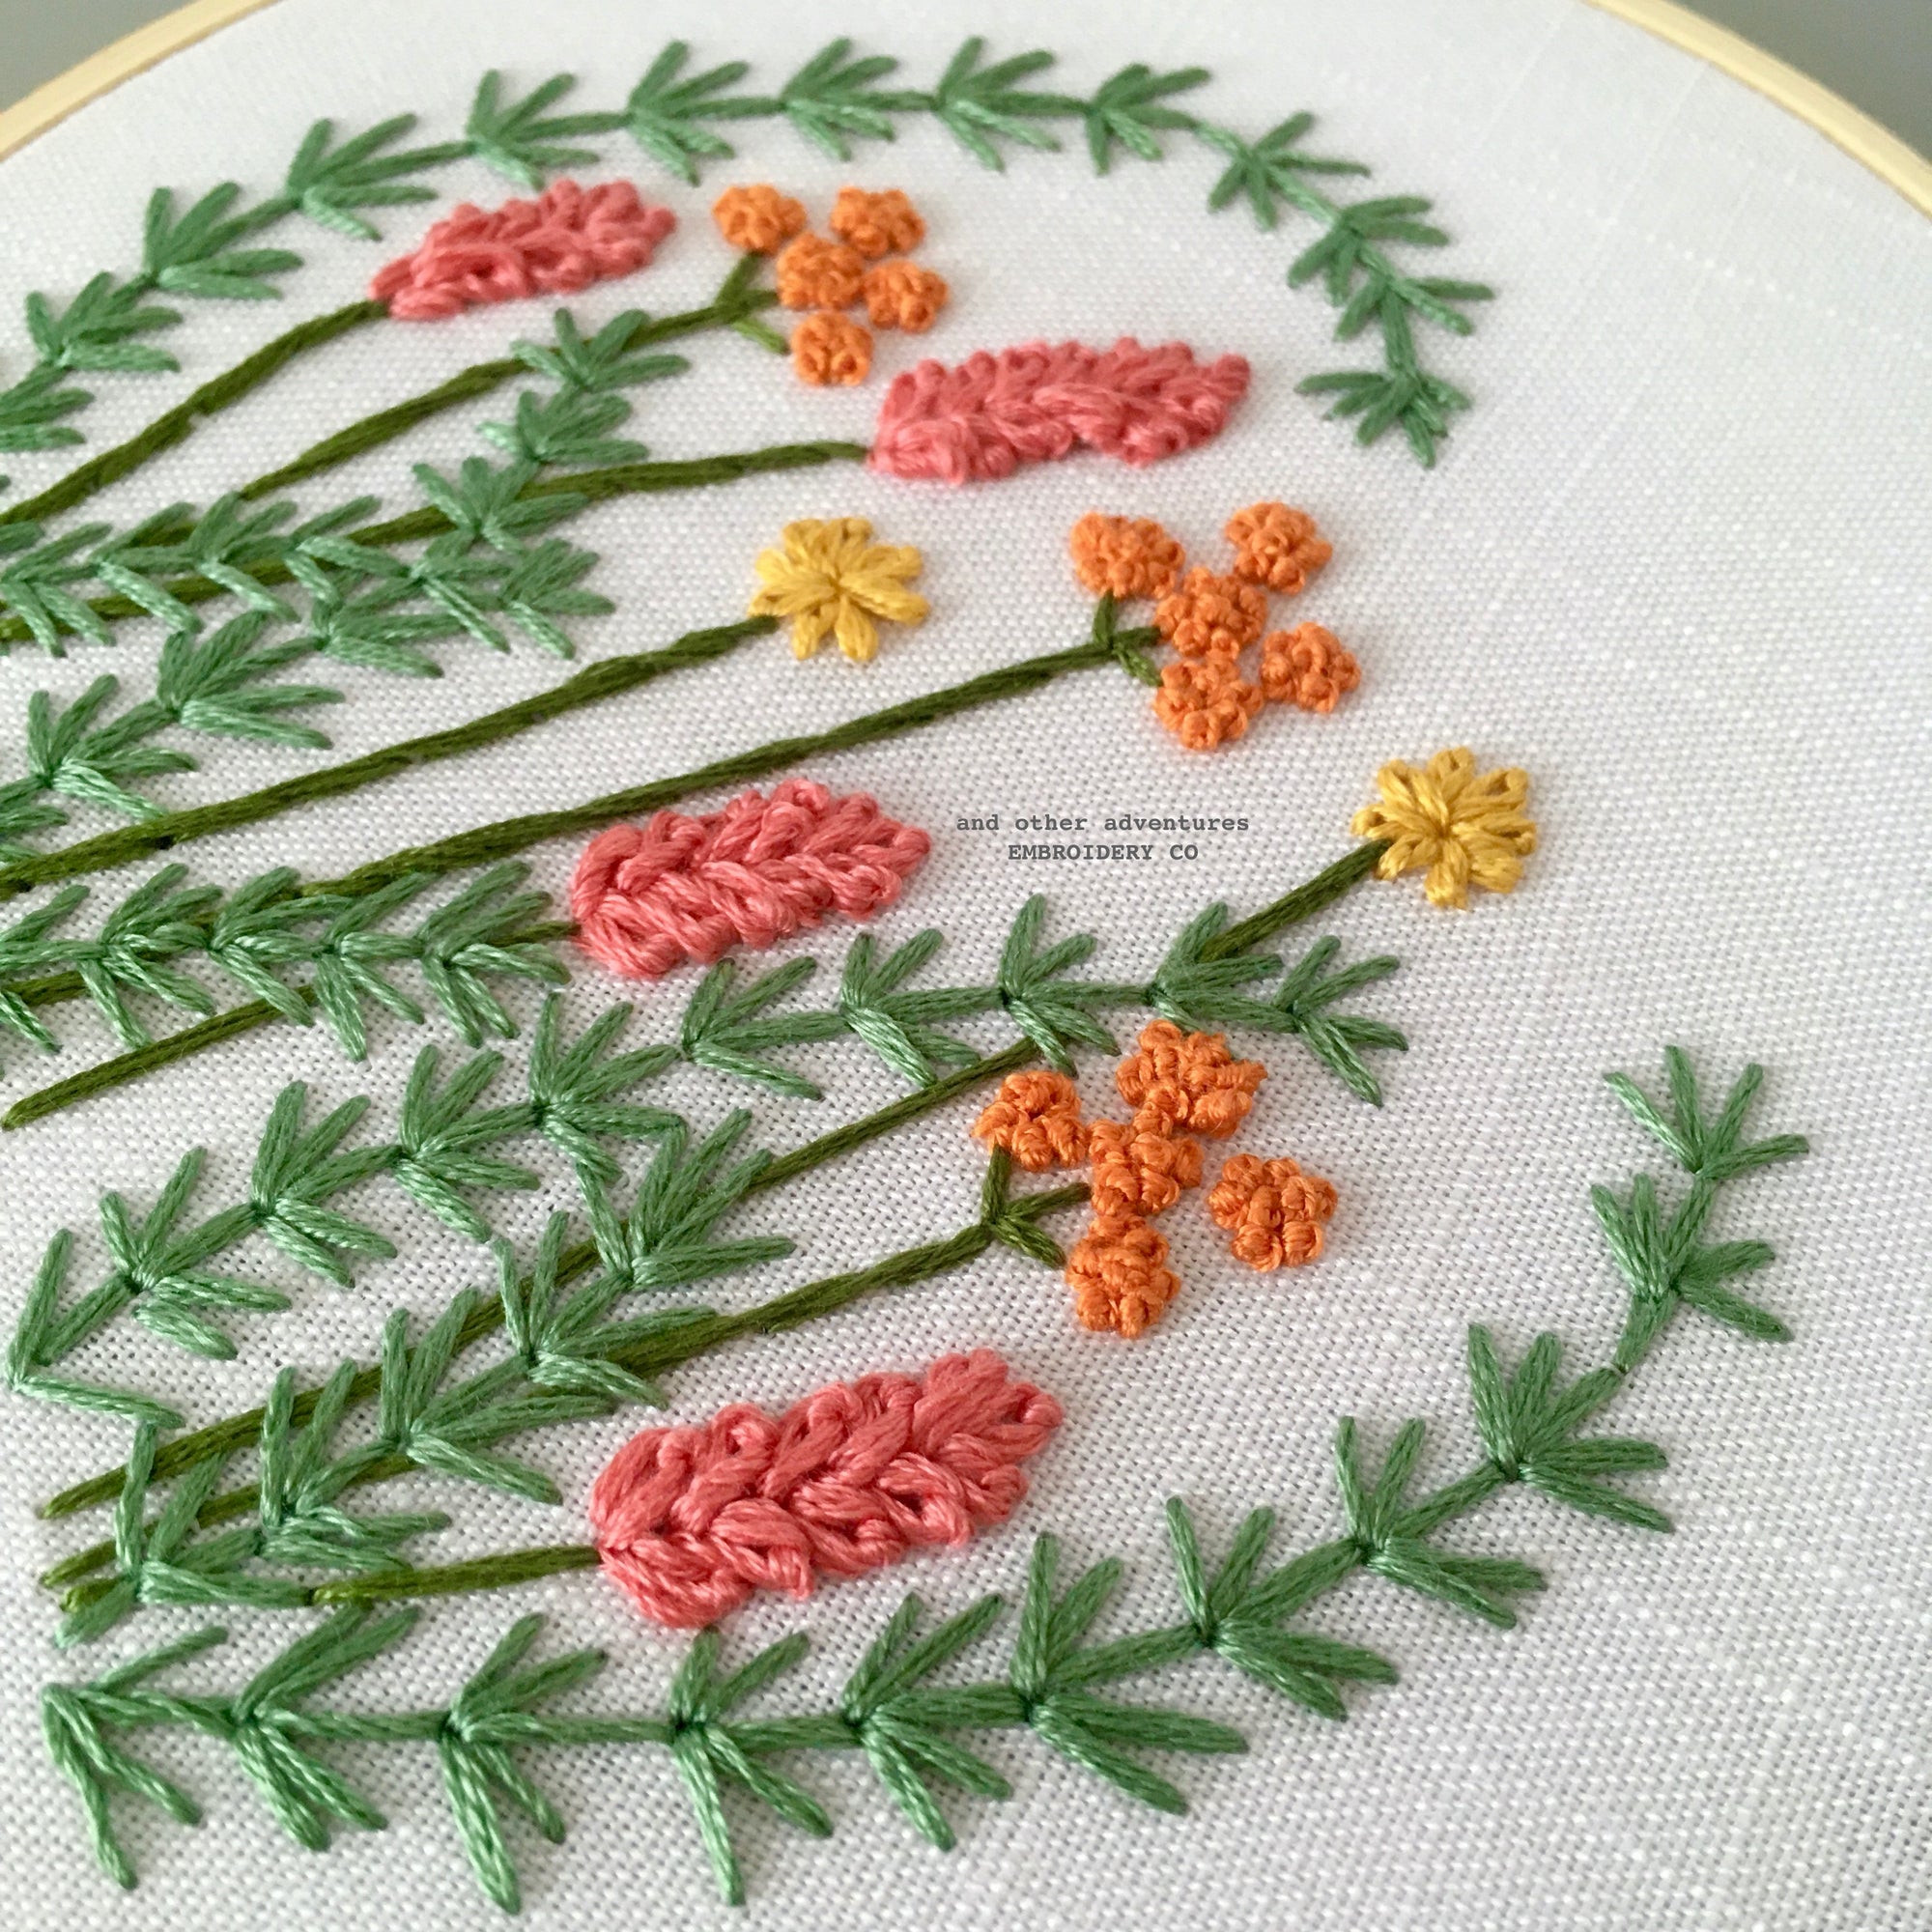 Beginner Hand Embroidery Pattern - Wild Garden Sunset - And Other  Adventures Embroidery Co